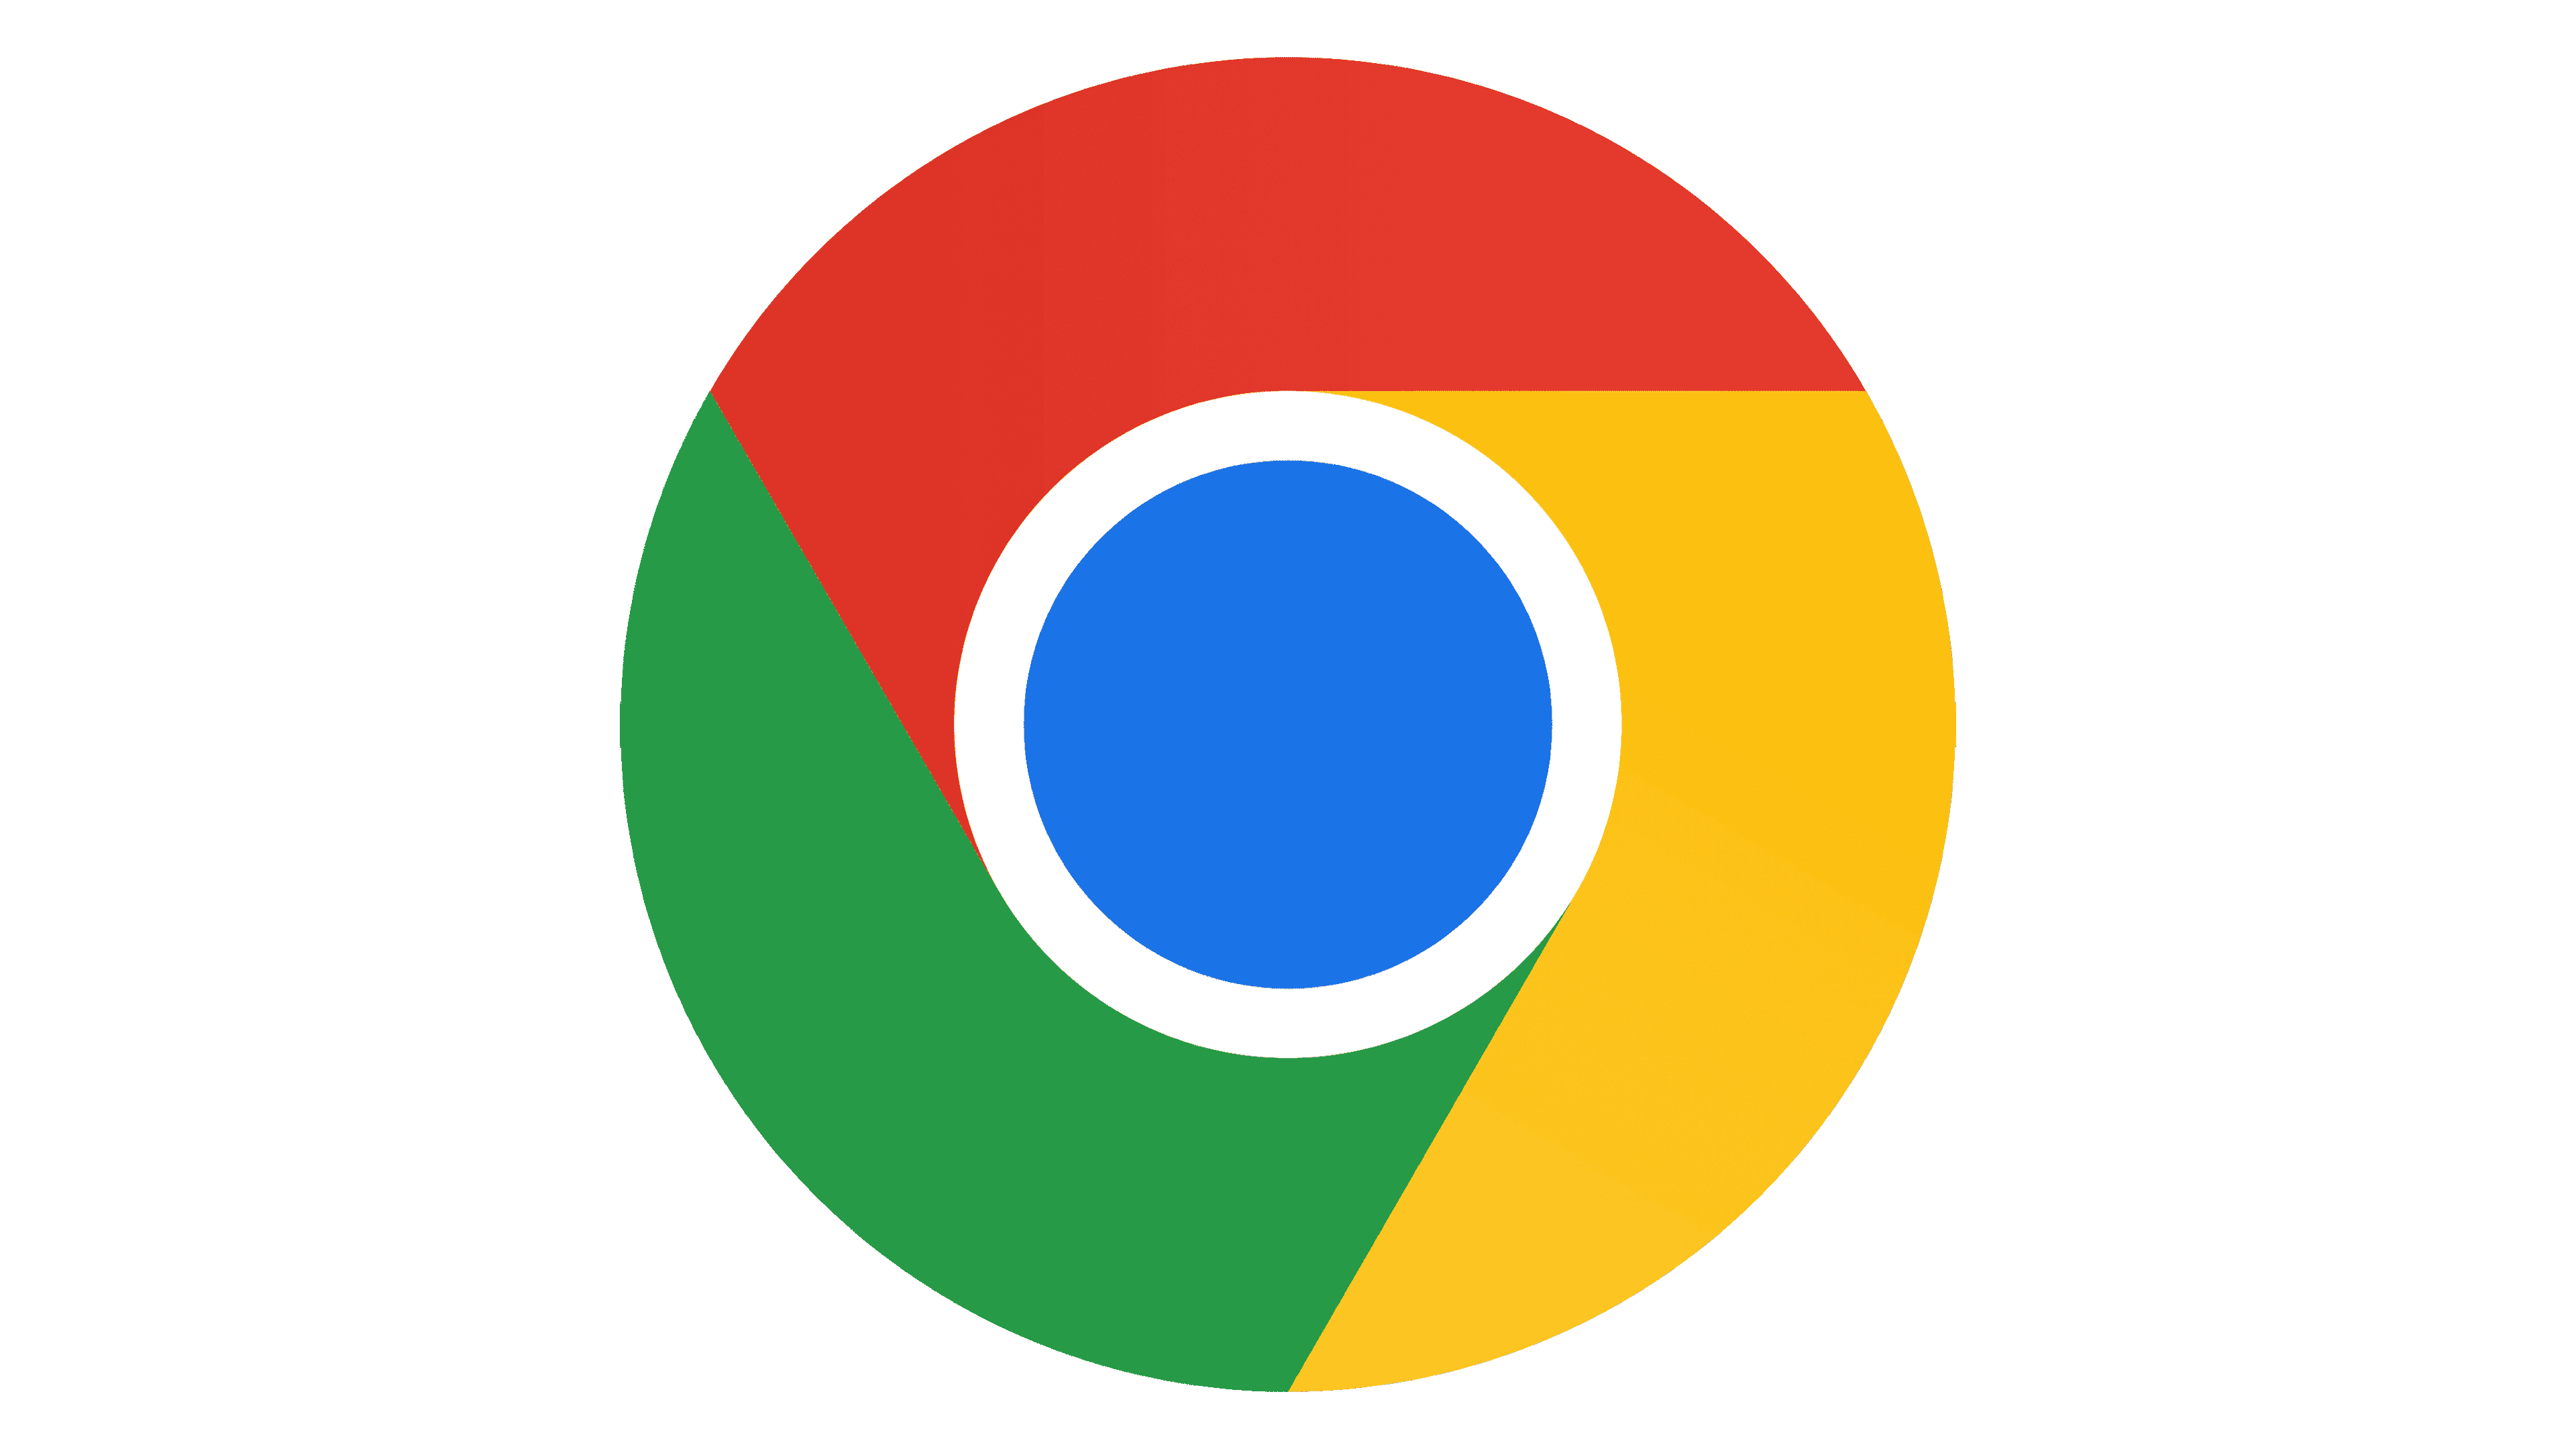 Chrome Logo and symbol, meaning, history, sign.